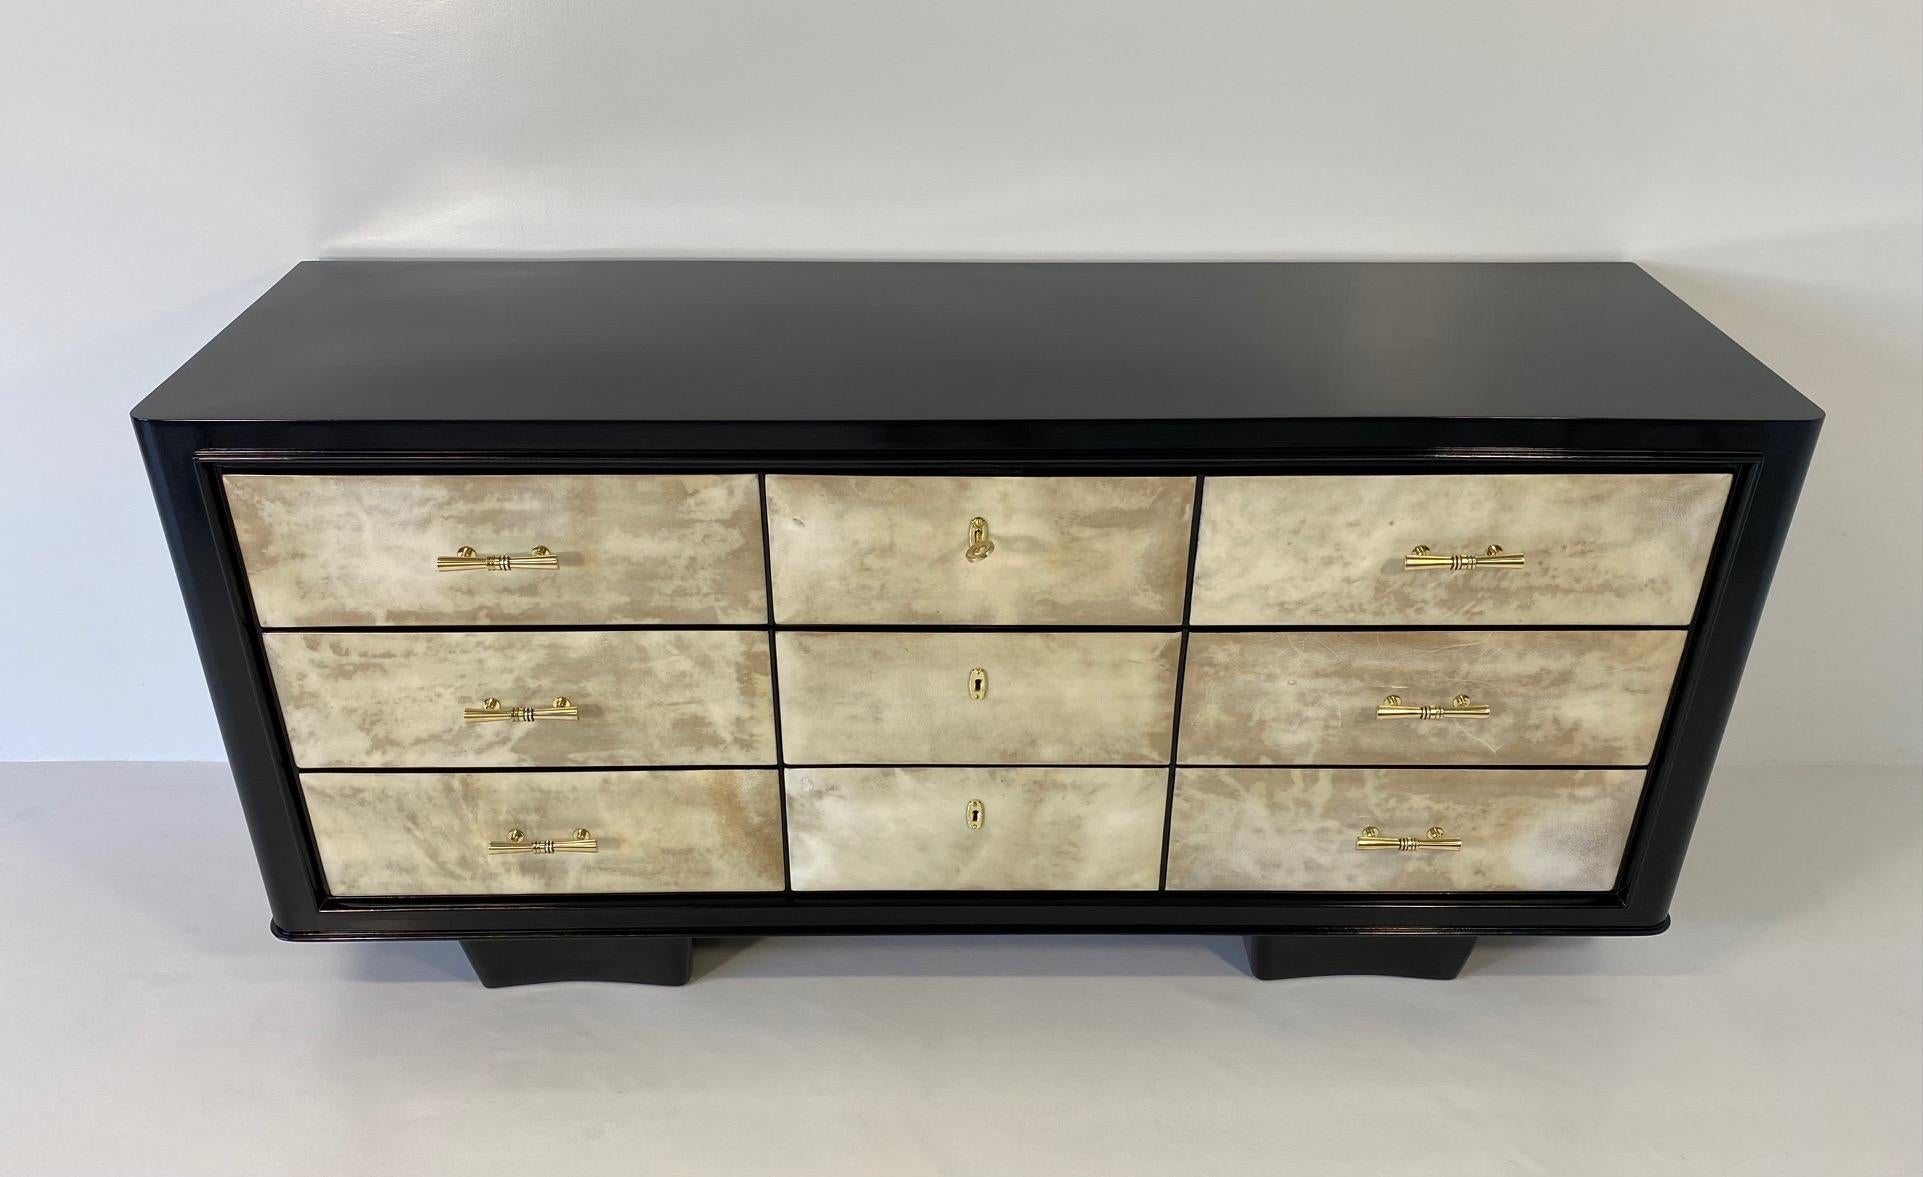 This elegant Art Deco dresser was produced in Italy in the 1940s.

It features nine parchment drawers, framed by a black lacquered structure. Handles, keyholes and keys are in brass.

Completely restored.